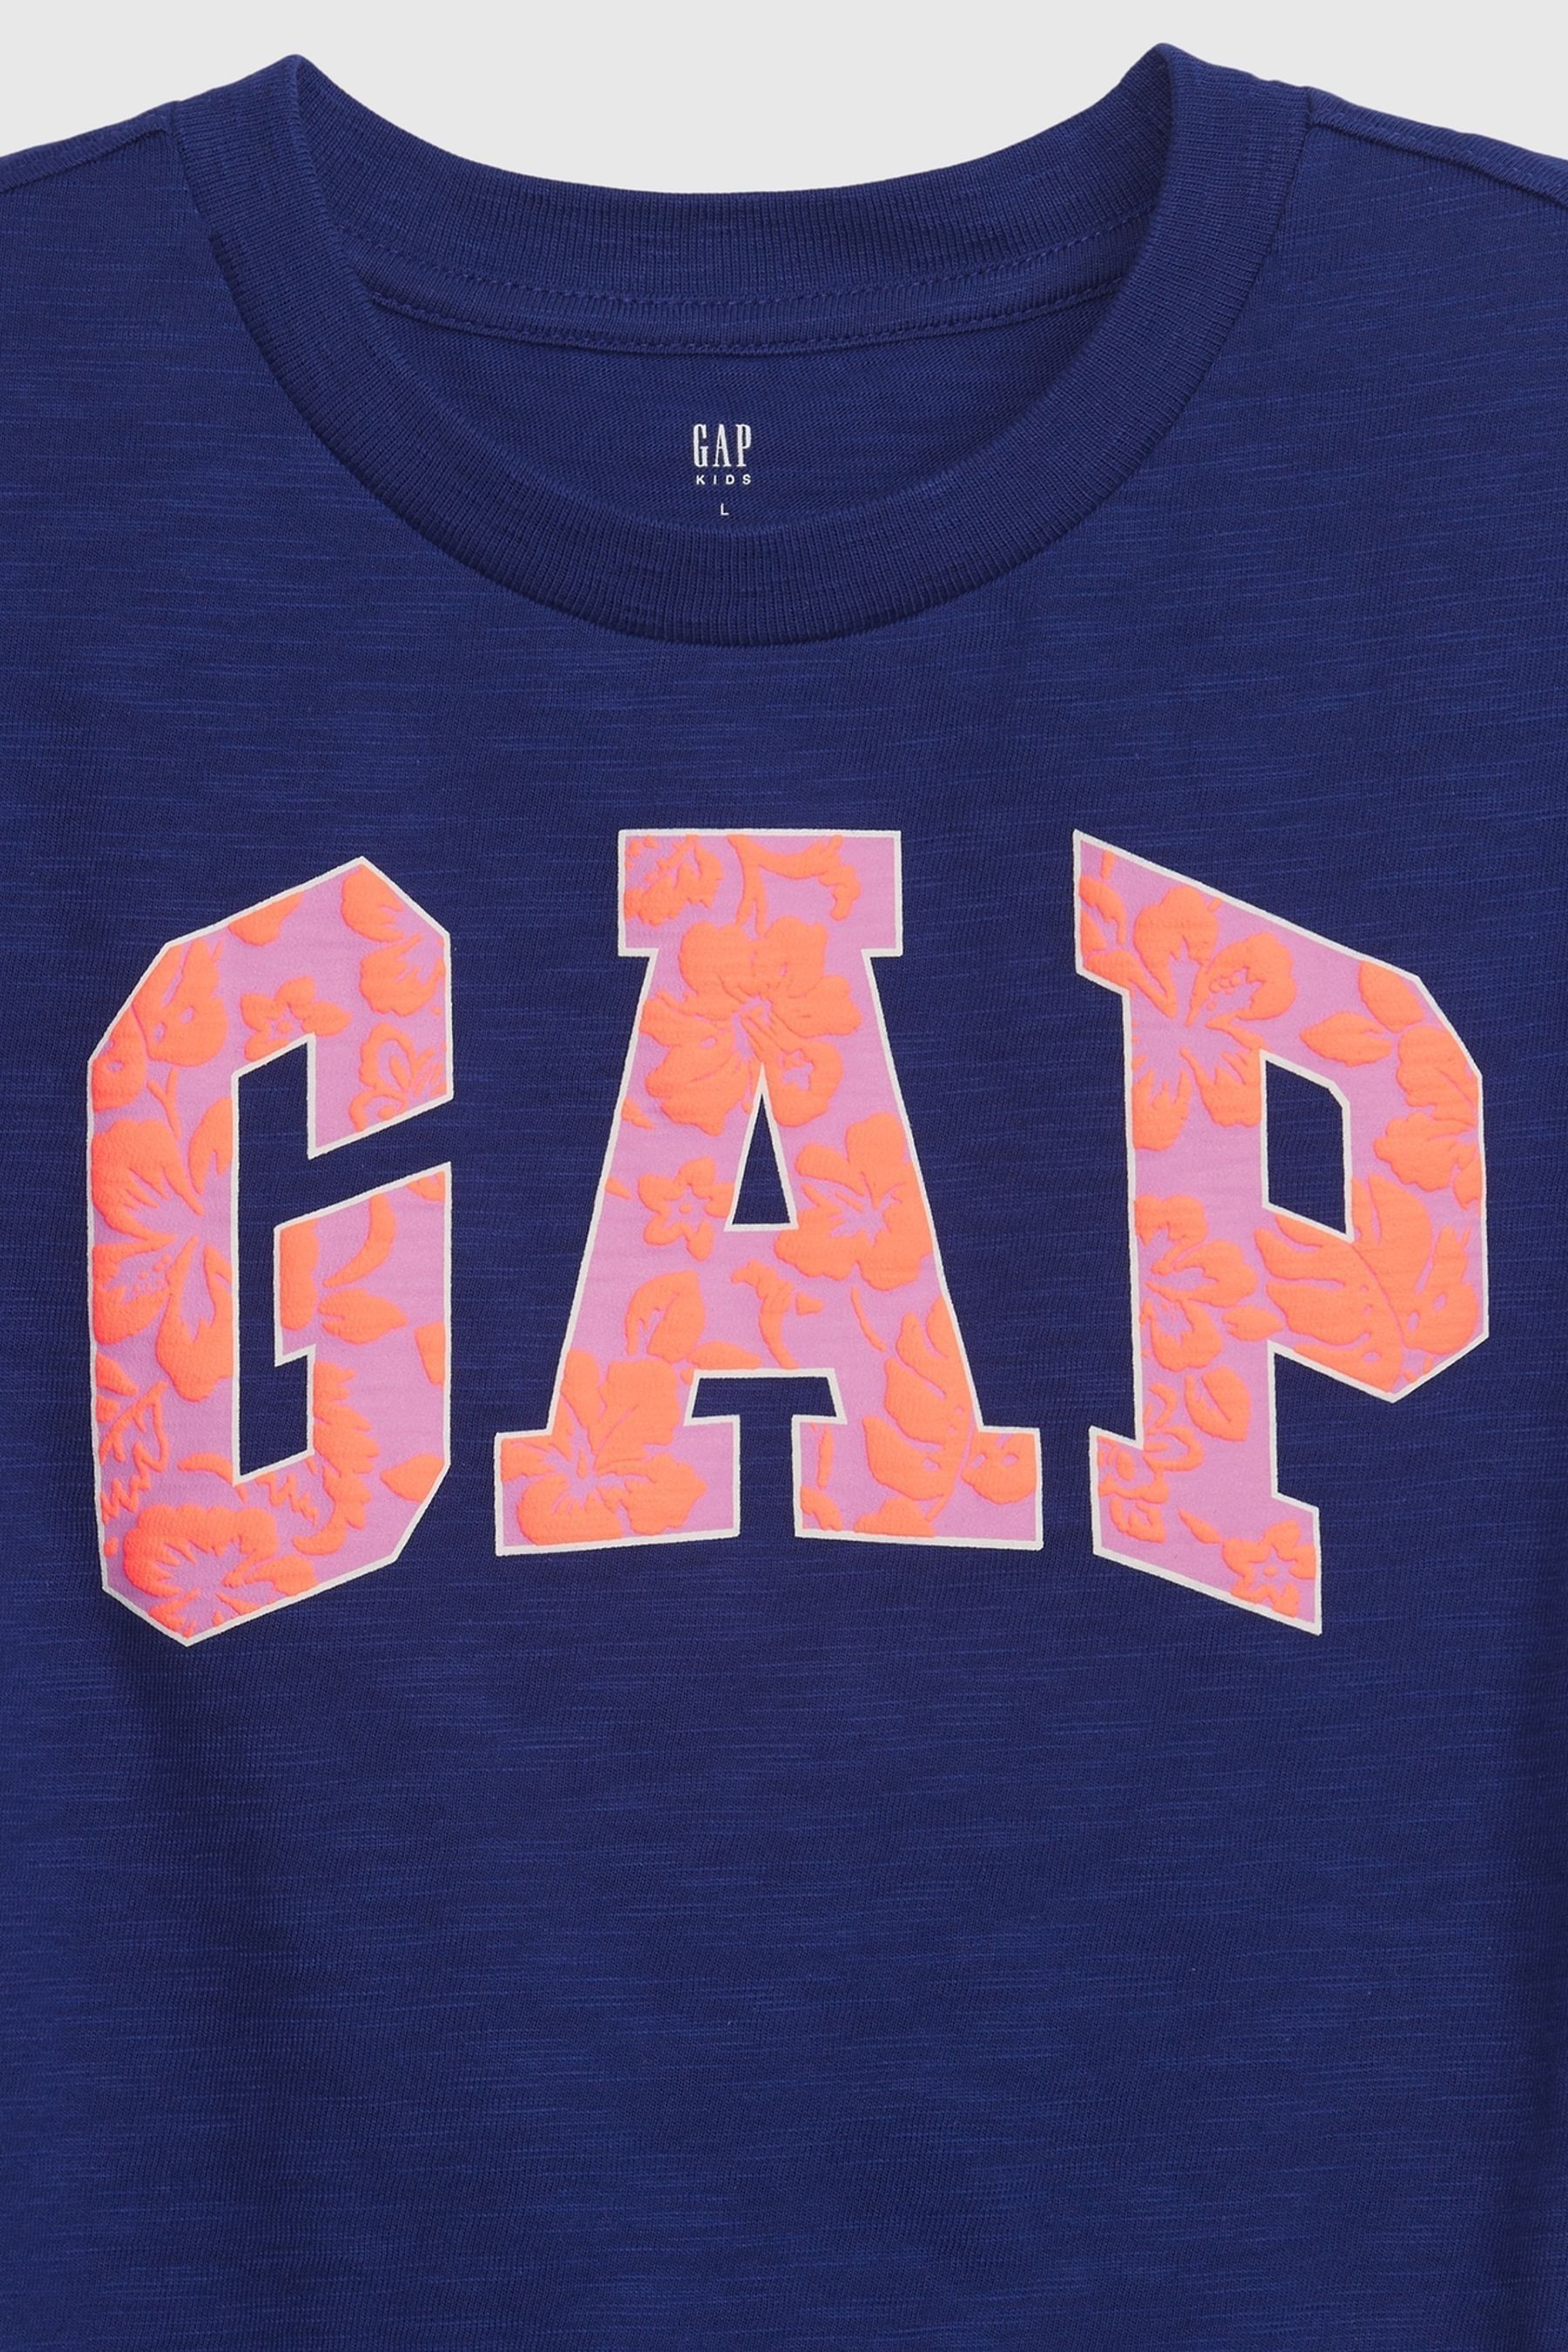 Buy Gap Floral Logo Crew Neck T-Shirt from the Gap online shop